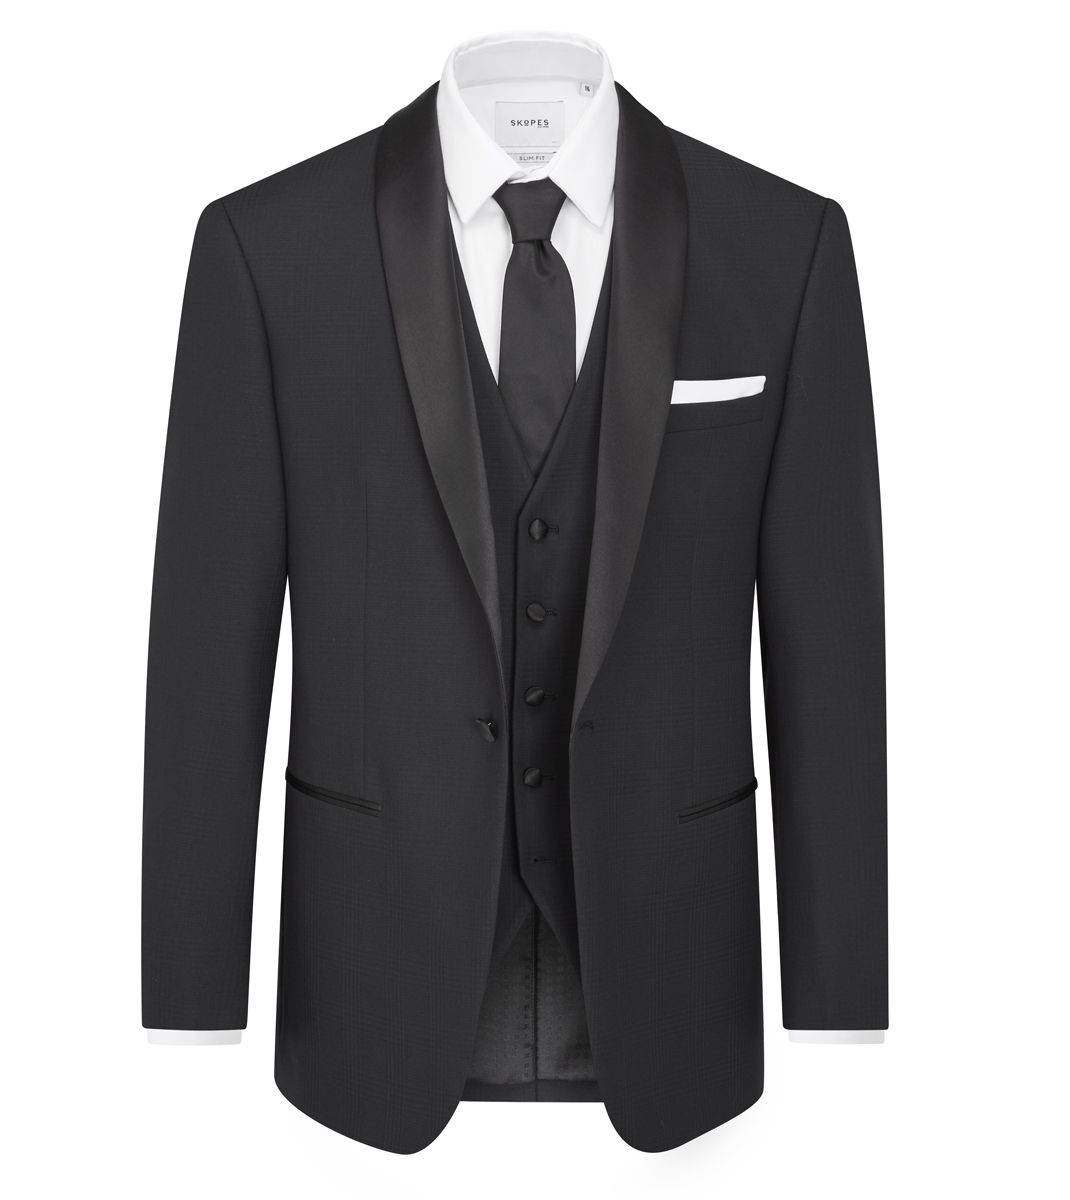 Newman Black Self Check Dinner Suit Jacket